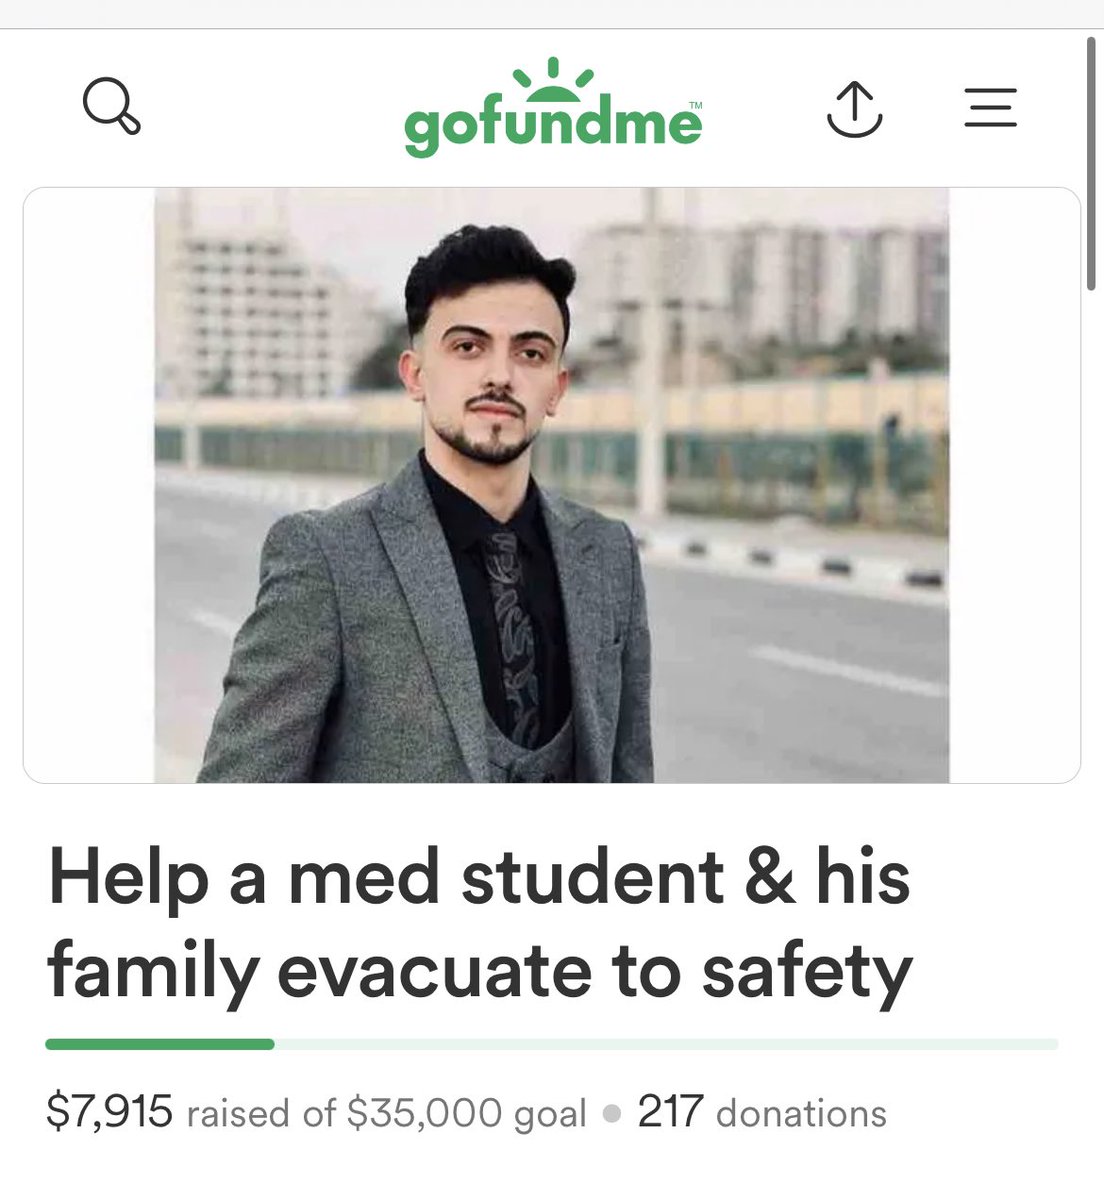 ‼️ We’ve just got $1,500 more to raise to register Mohammed’s father for evacuation! Every donation brings him a palpable step closer to joining his wife & son in Egypt. Once they’re reunited, he can think of making a living, & Moh can think of his studies gofund.me/7f190a34